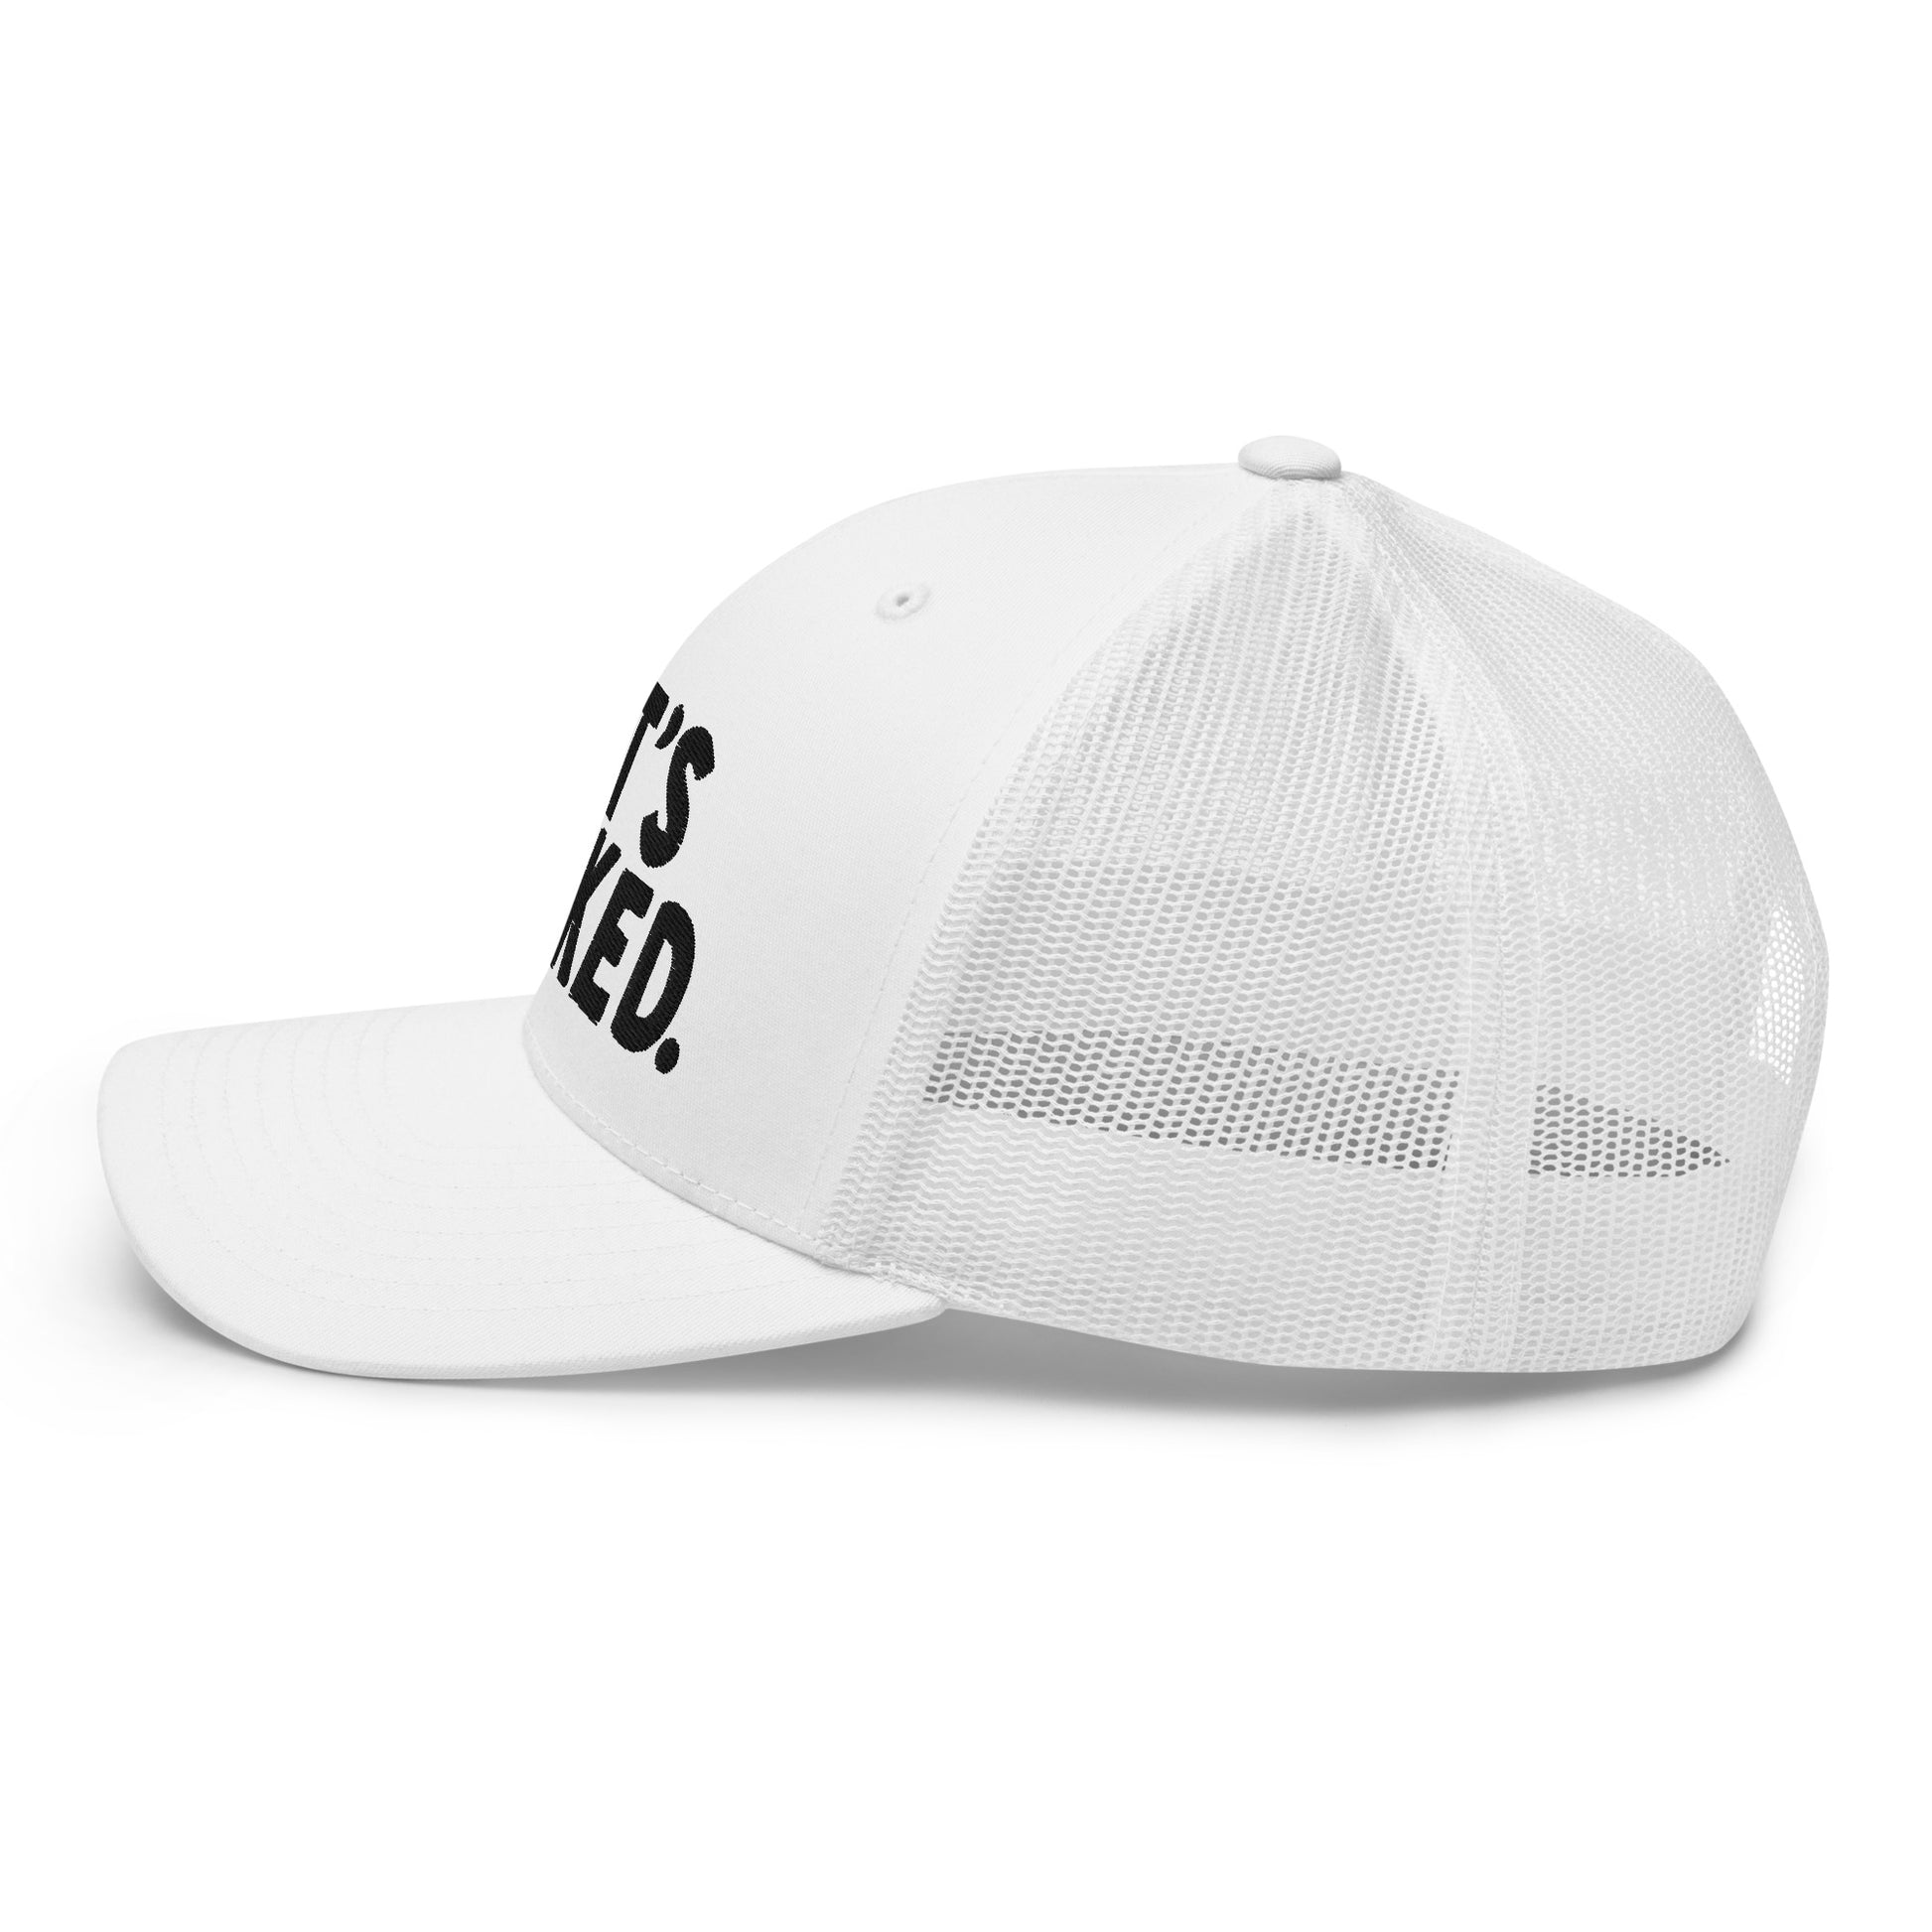 Signature series hat that says Shits fucked